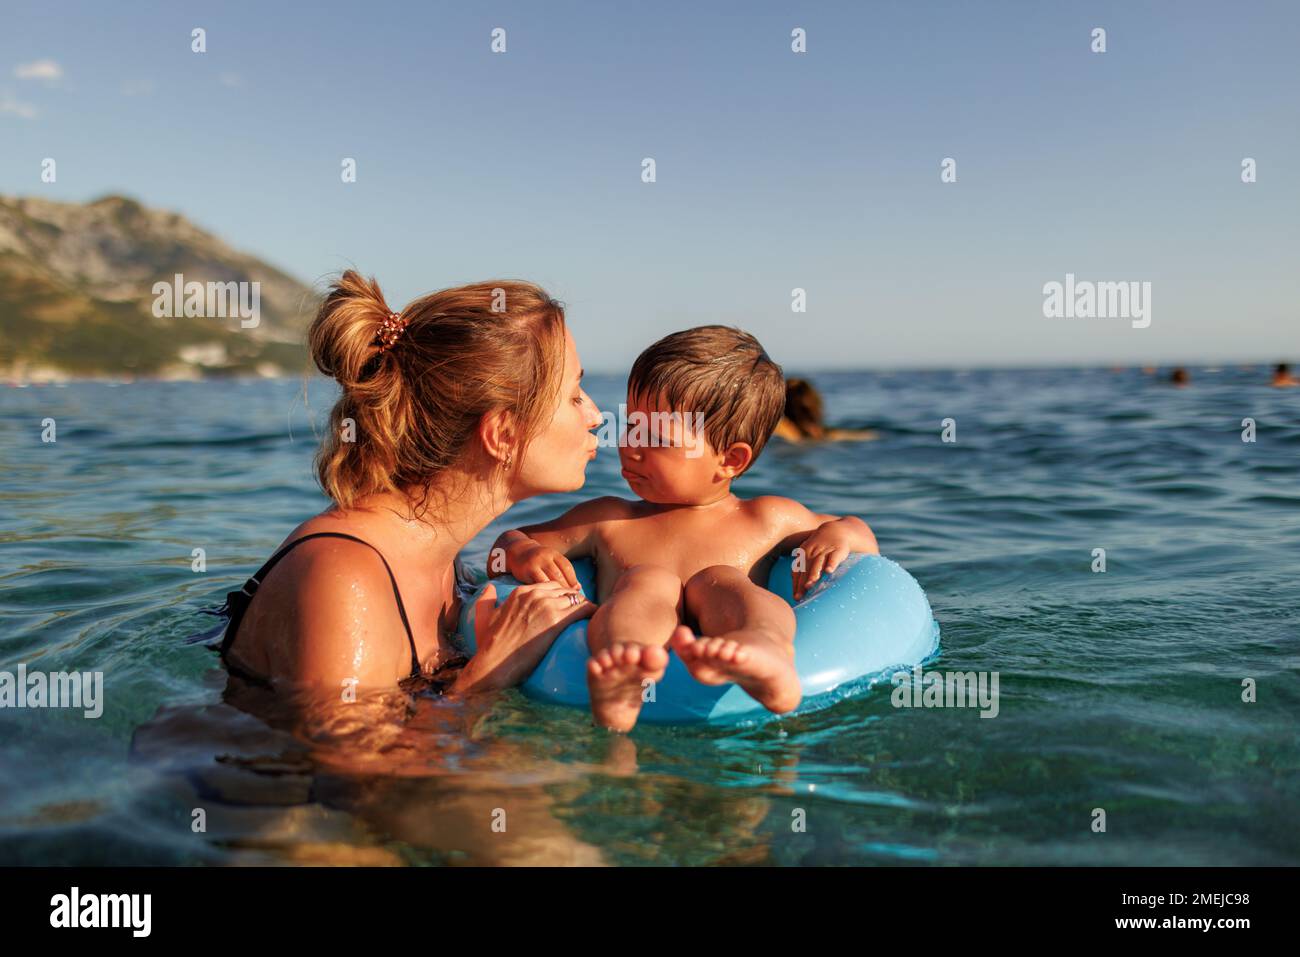 Happy young mother with blond hair plays with her little cheerful toddler son and rides him on a bright blue inflatable ring in the deep blue shiny Ad Stock Photo